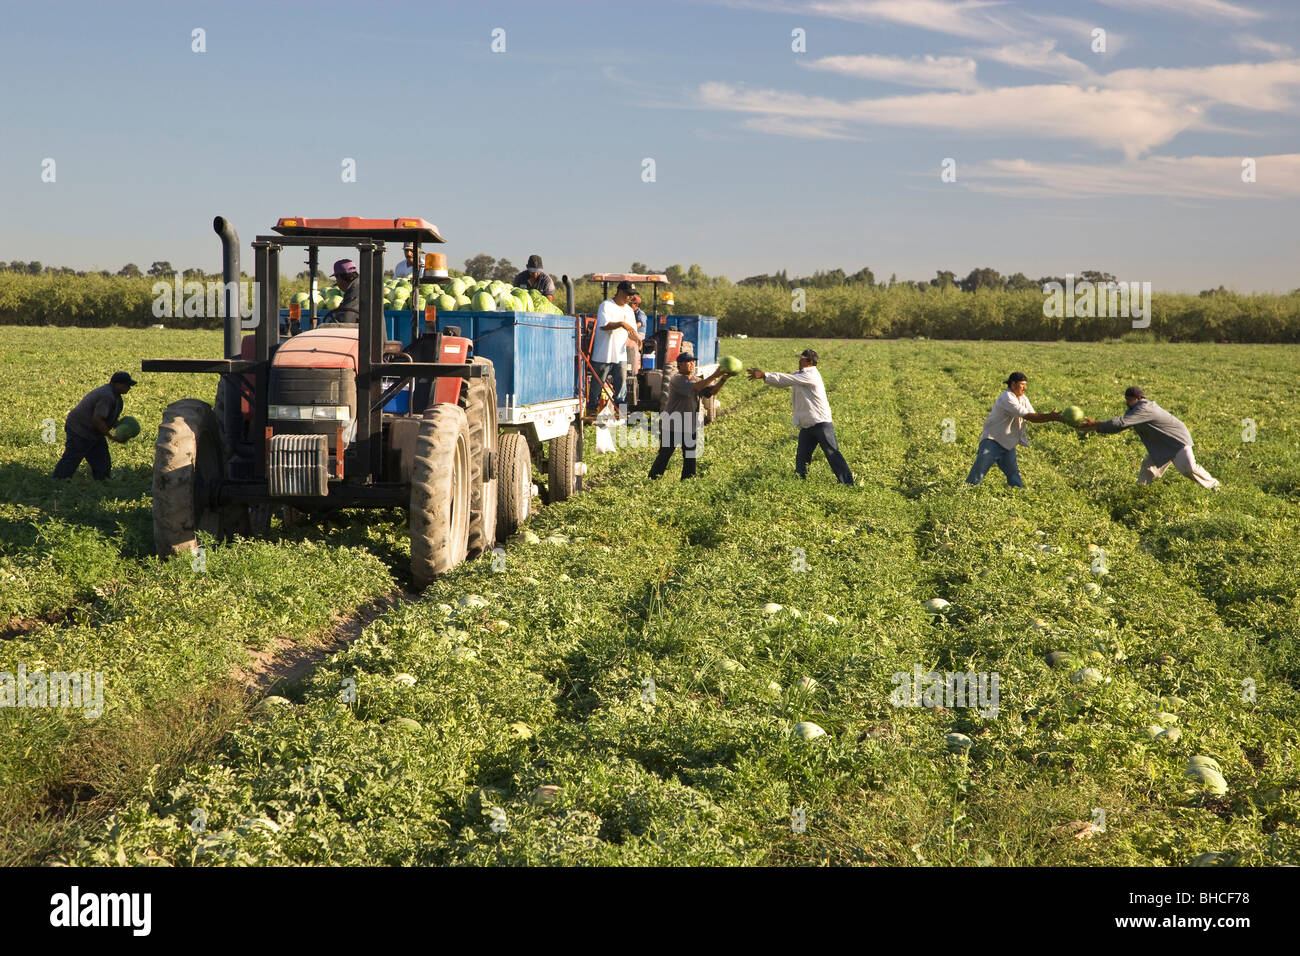 Watermelon harvest, workers loading trailer. Stock Photo